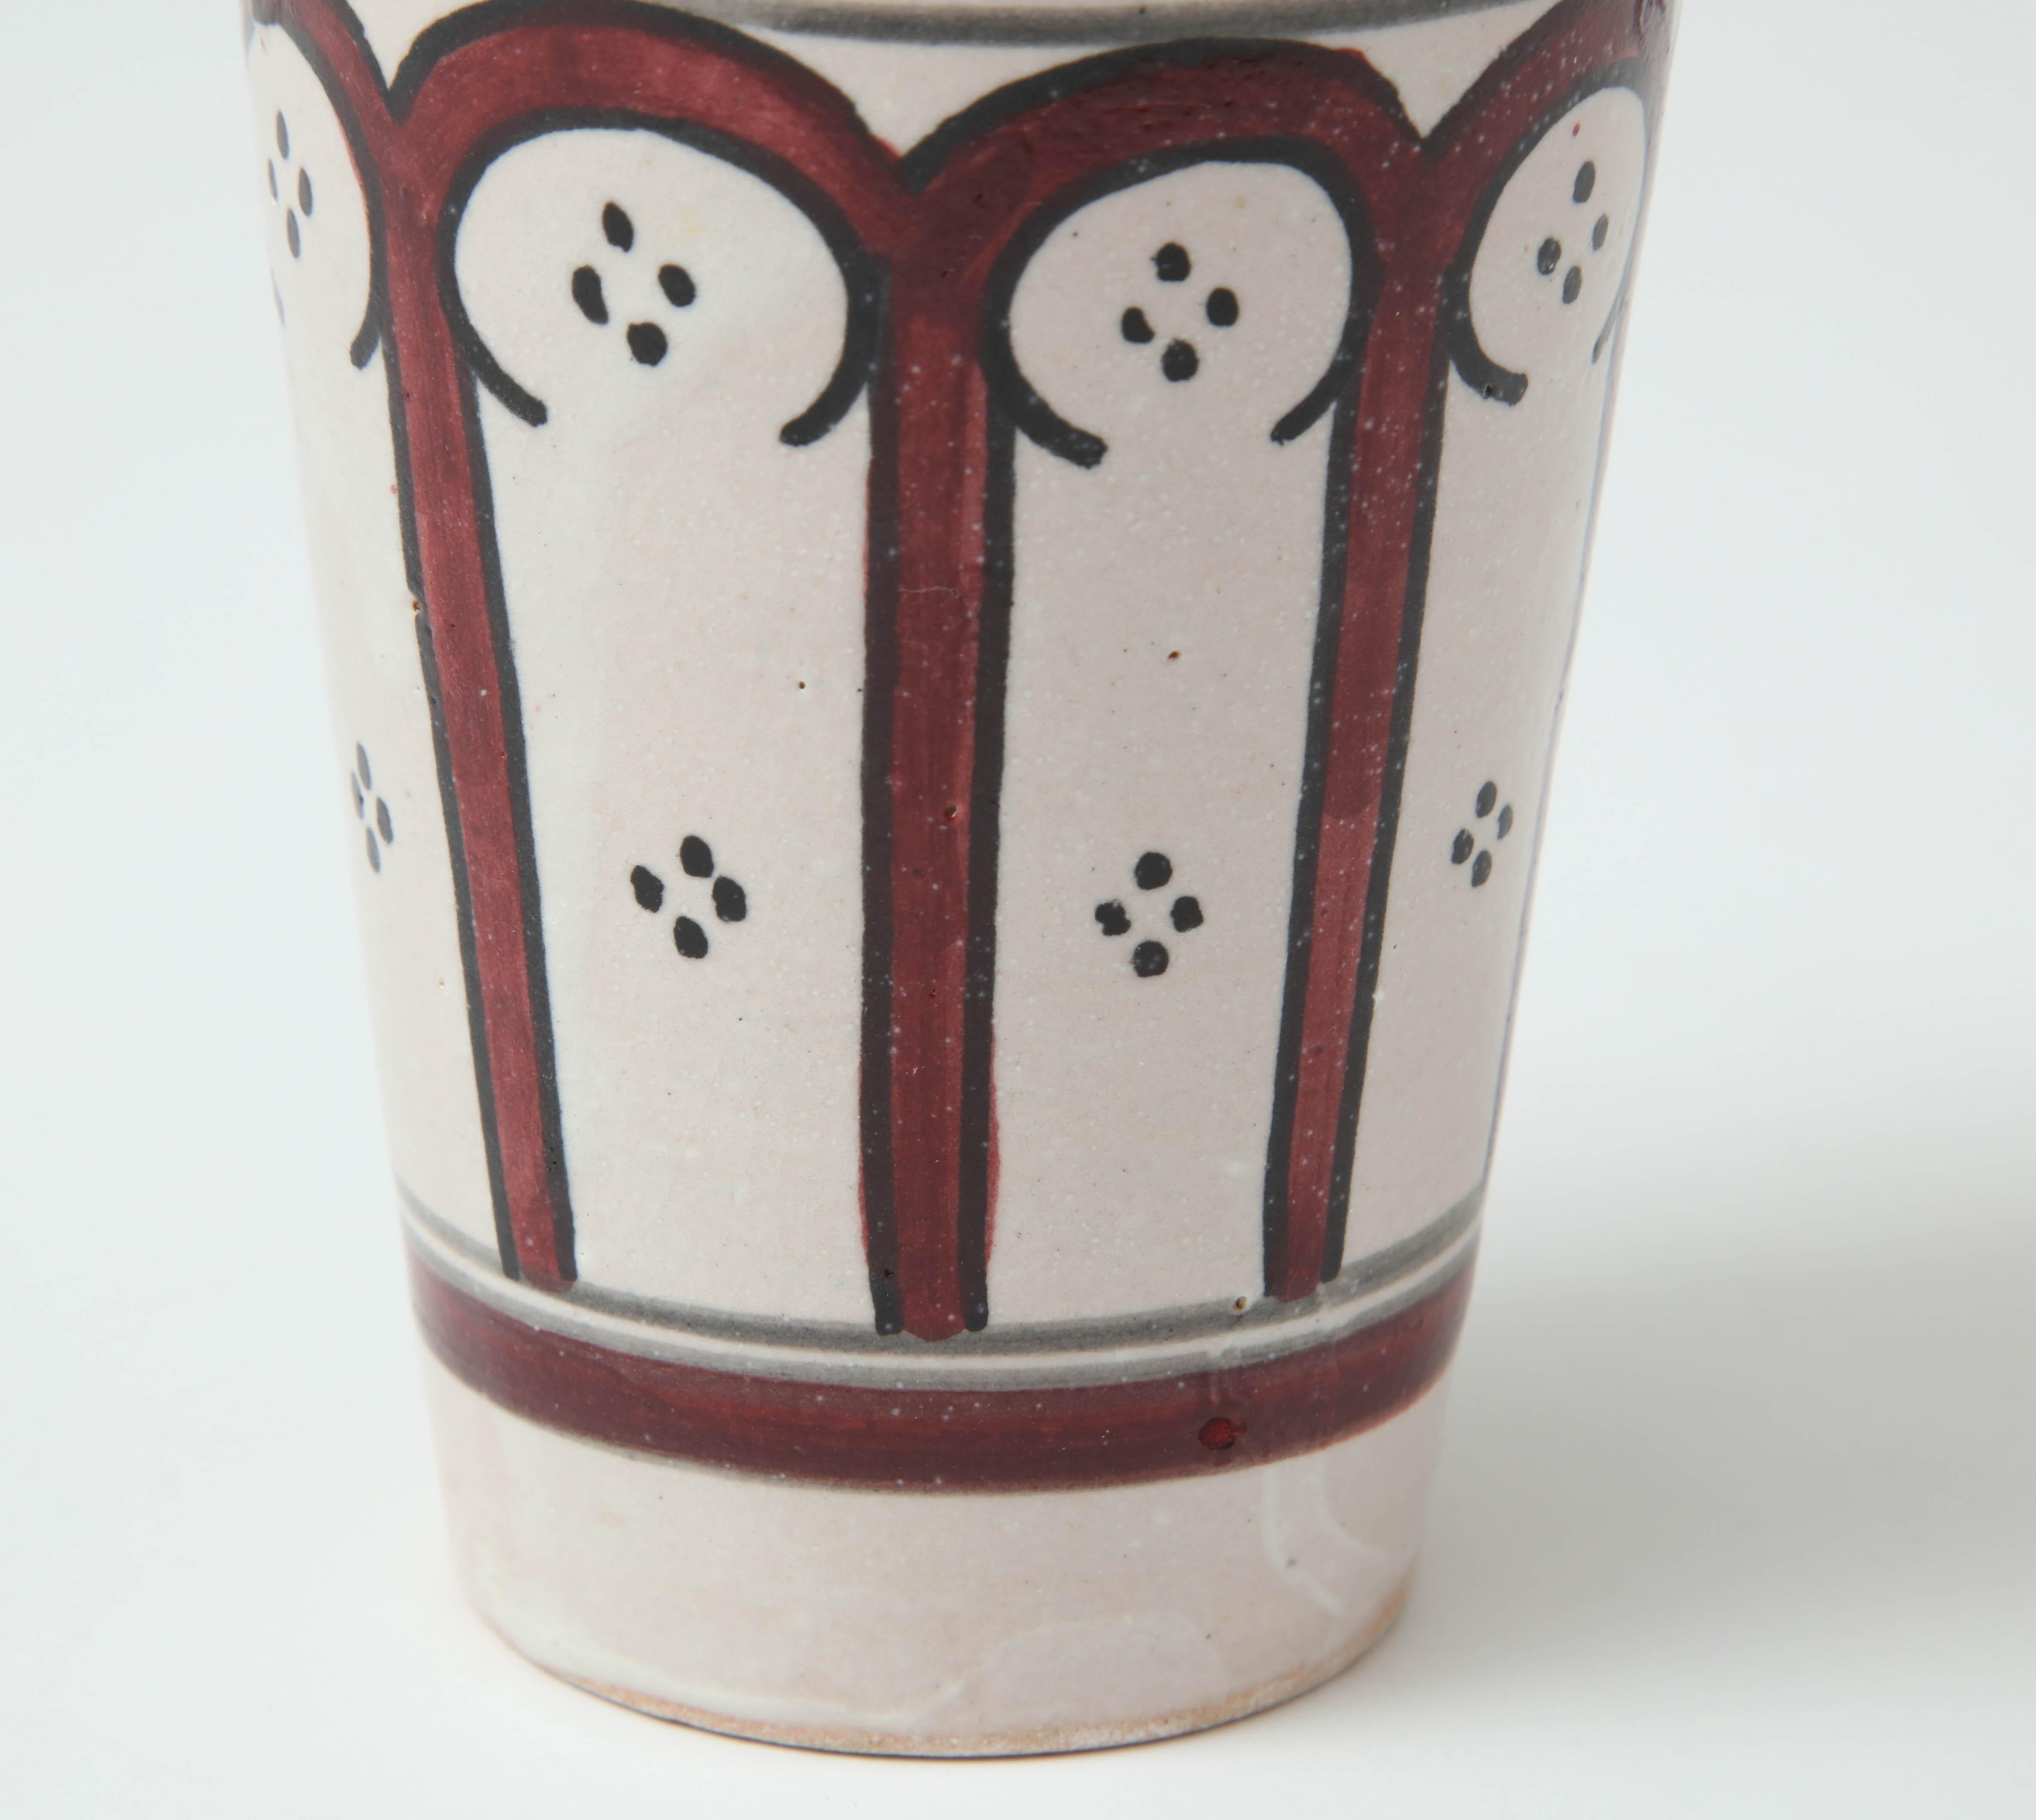 Moroccan Ceramic Vessel, Red and Cream Color, Handcrafted